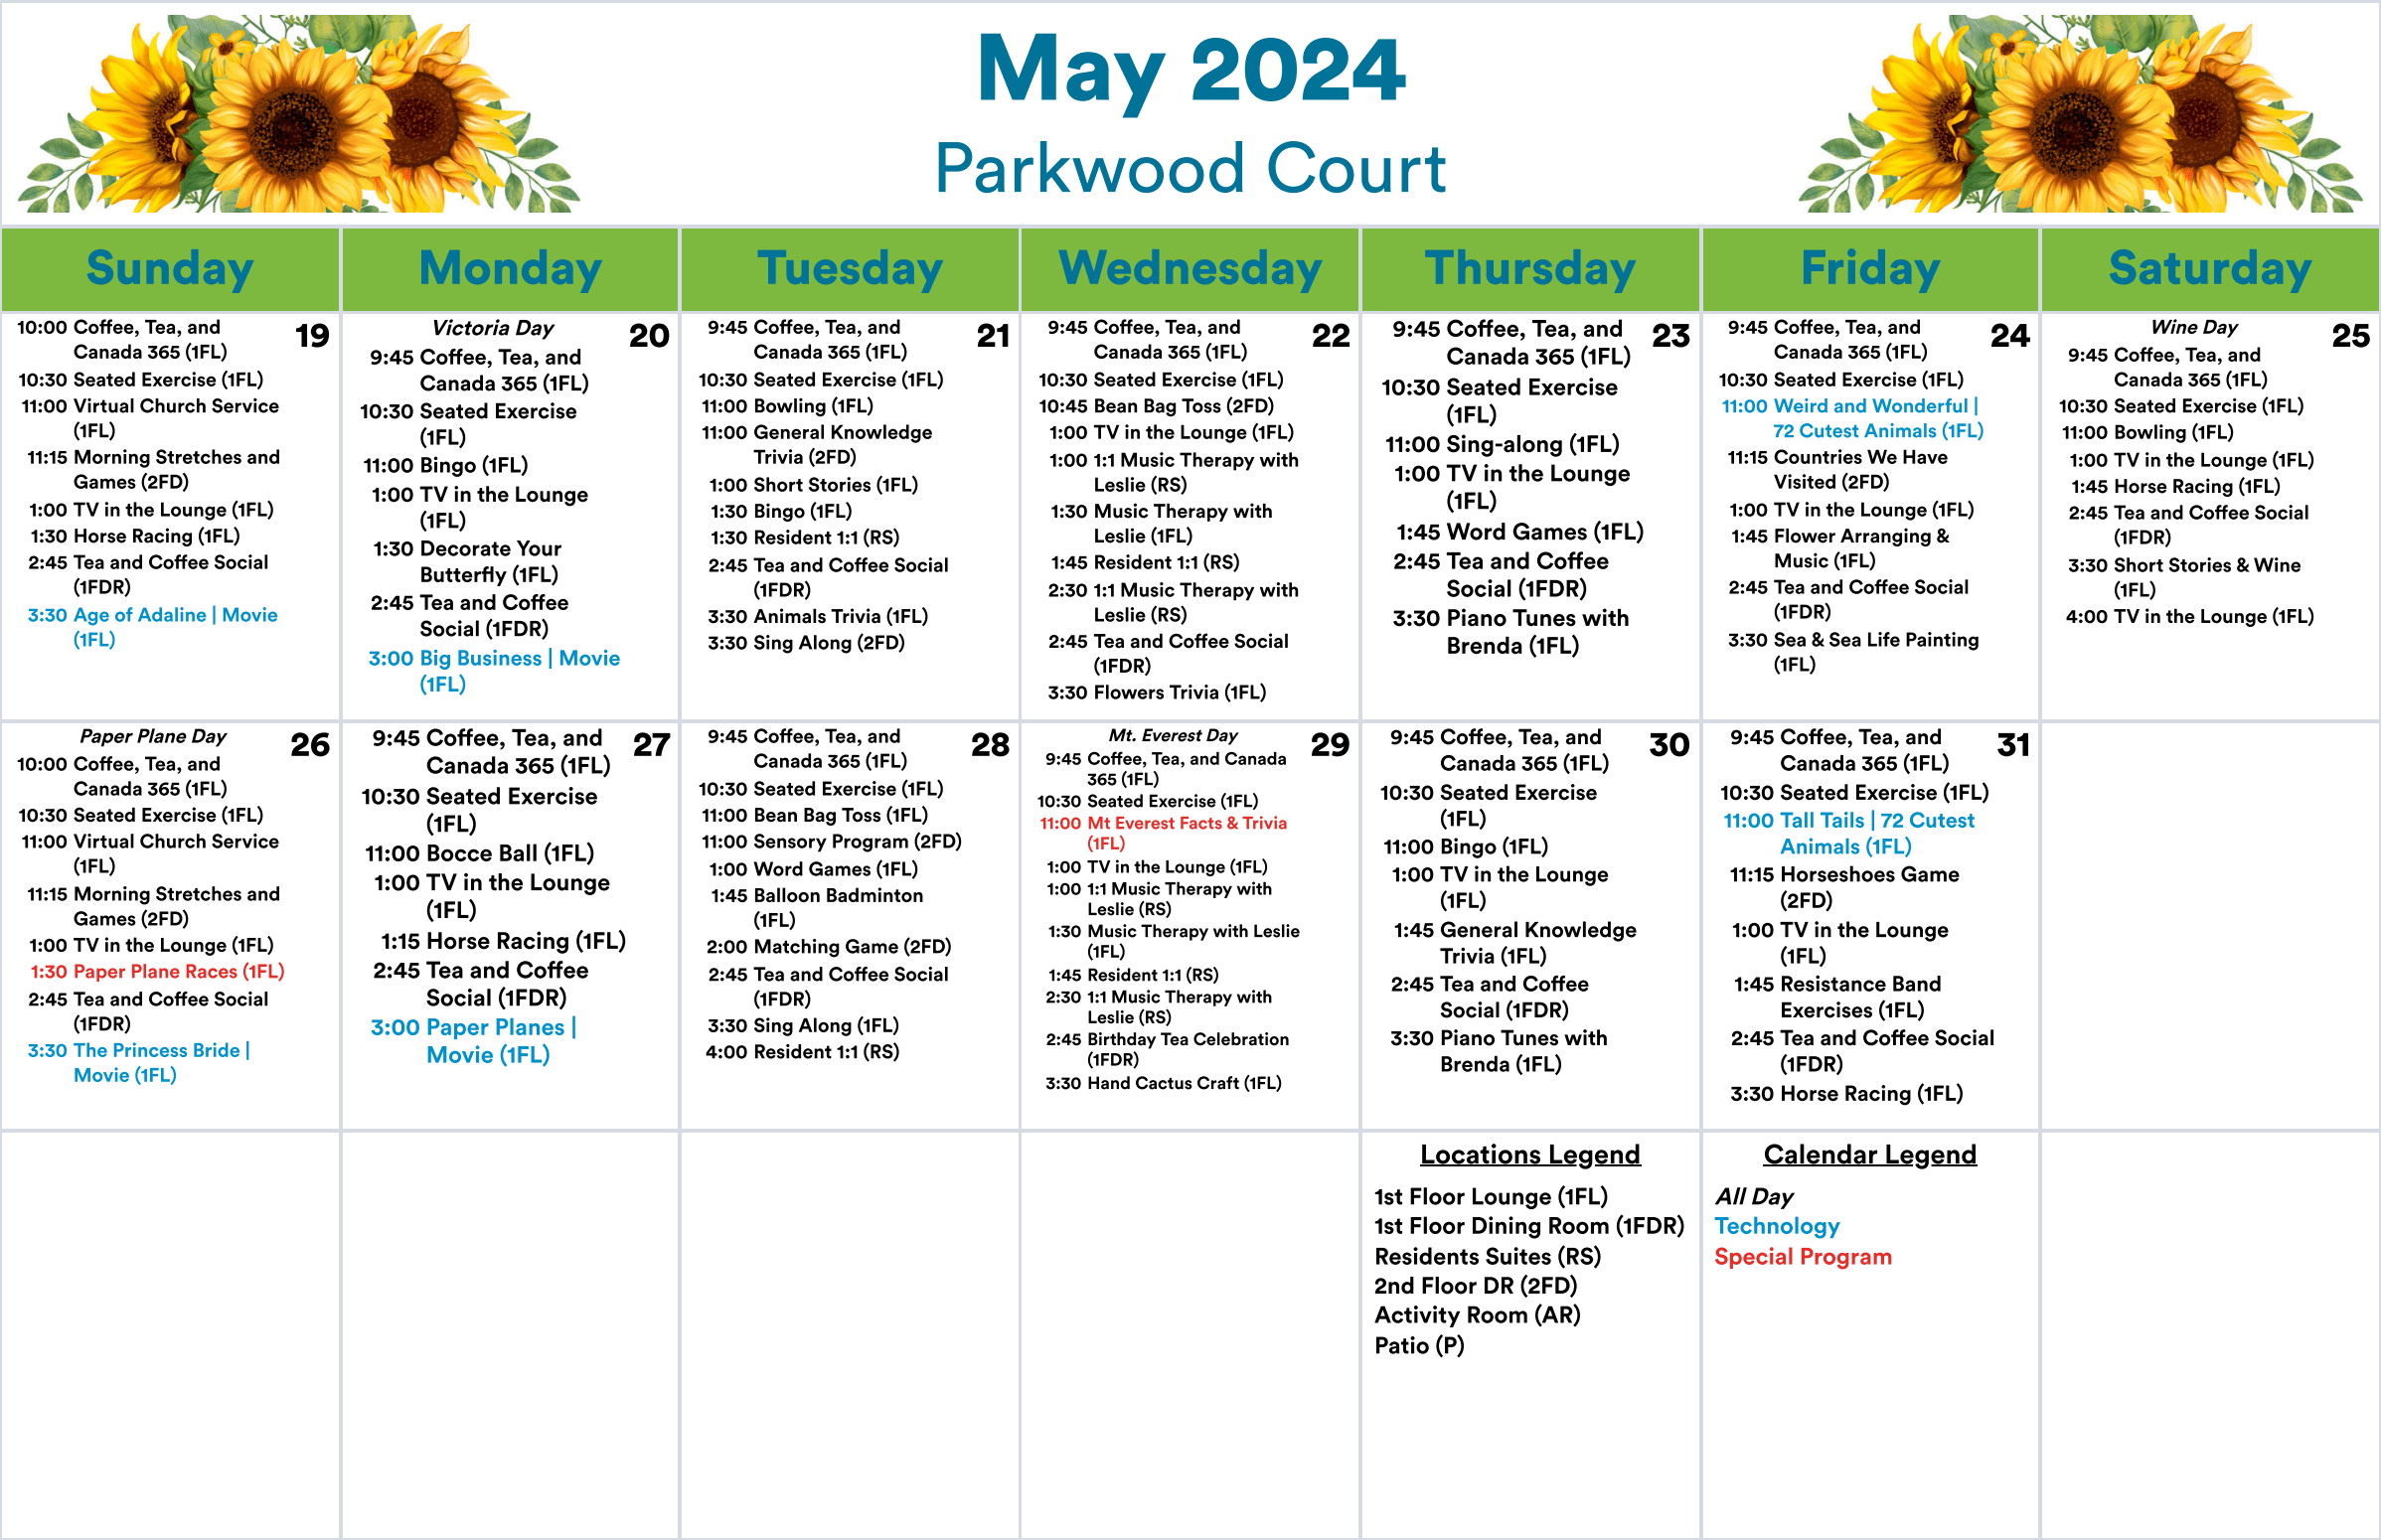 Parkwood Court May 19-31 2024 event calendar